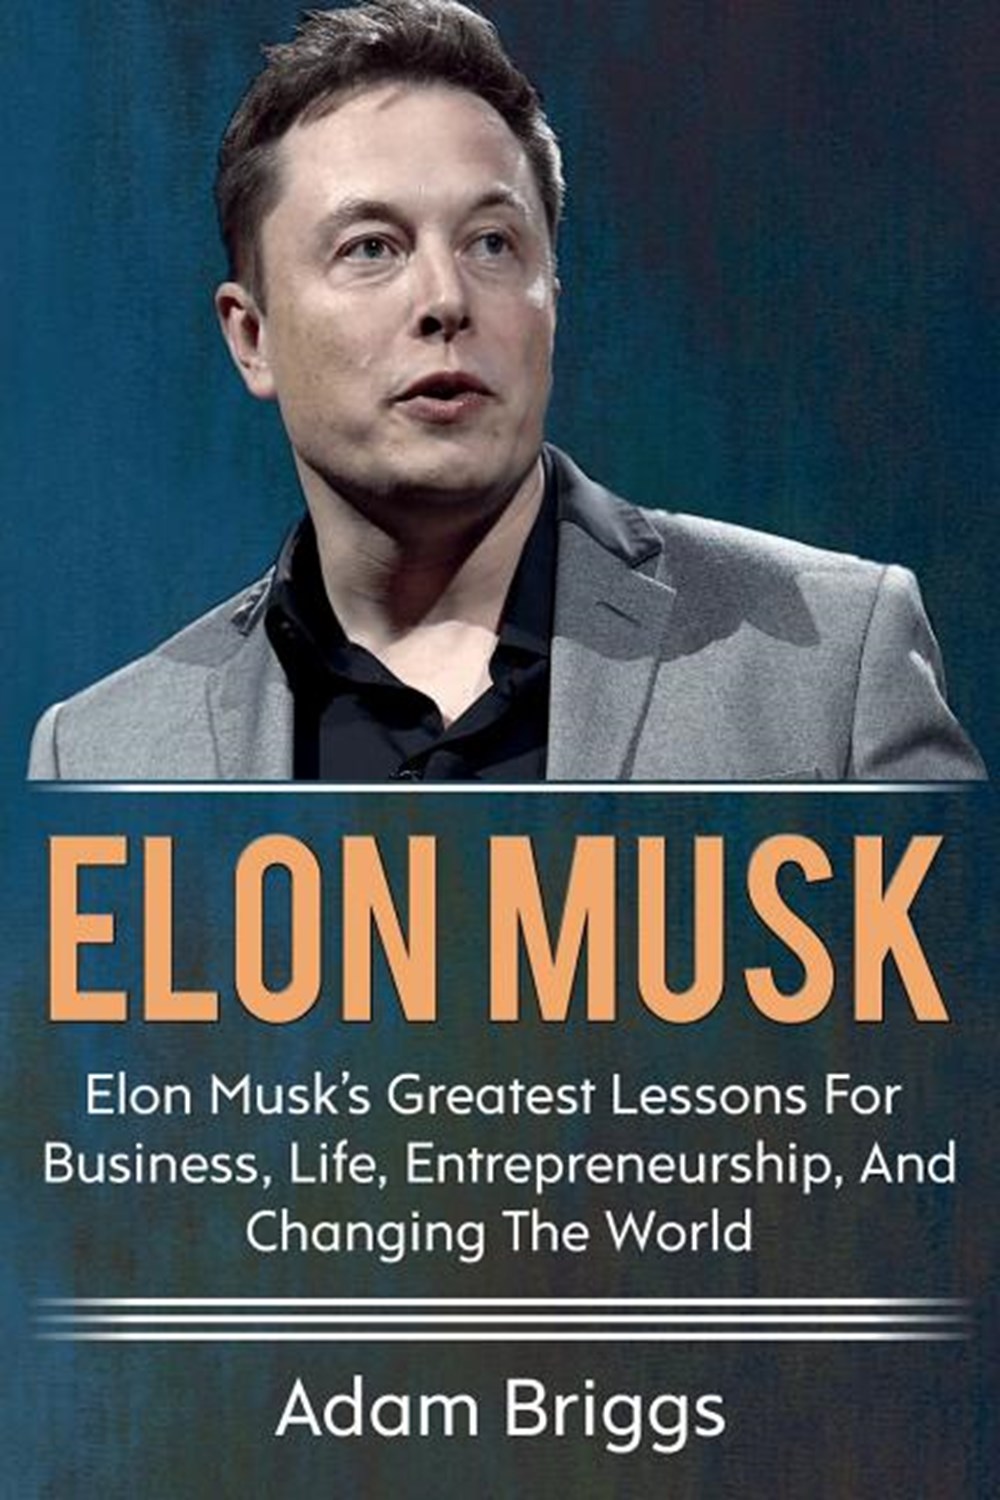 Elon Musk: Elon Musk's greatest lessons for business, life, entrepreneurship, and changing the world